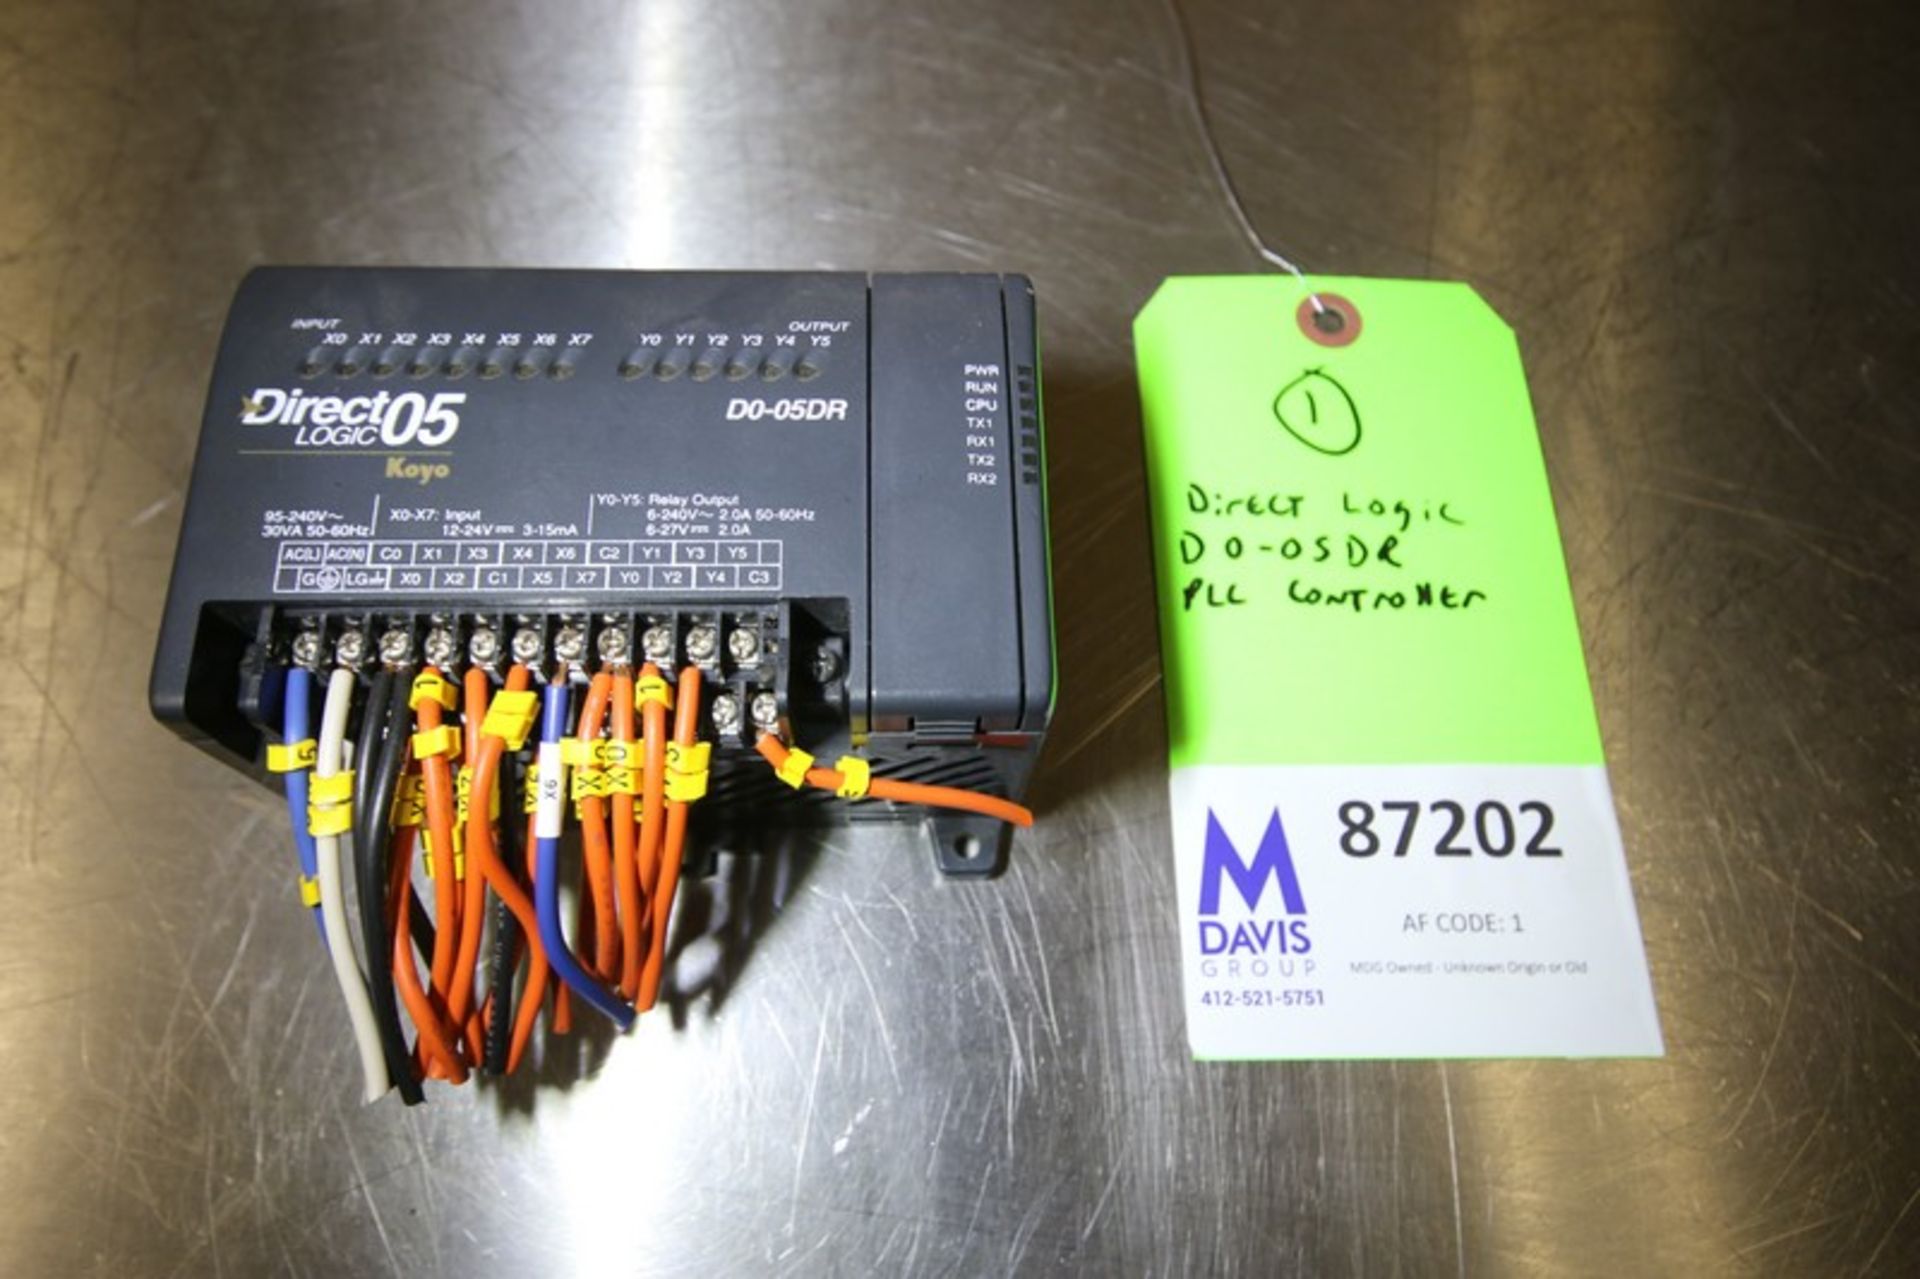 Direct Logix D0-05DR PLC Controller (INV#87202)(Located @ the MDG Auction Showroom in Pgh., PA)(